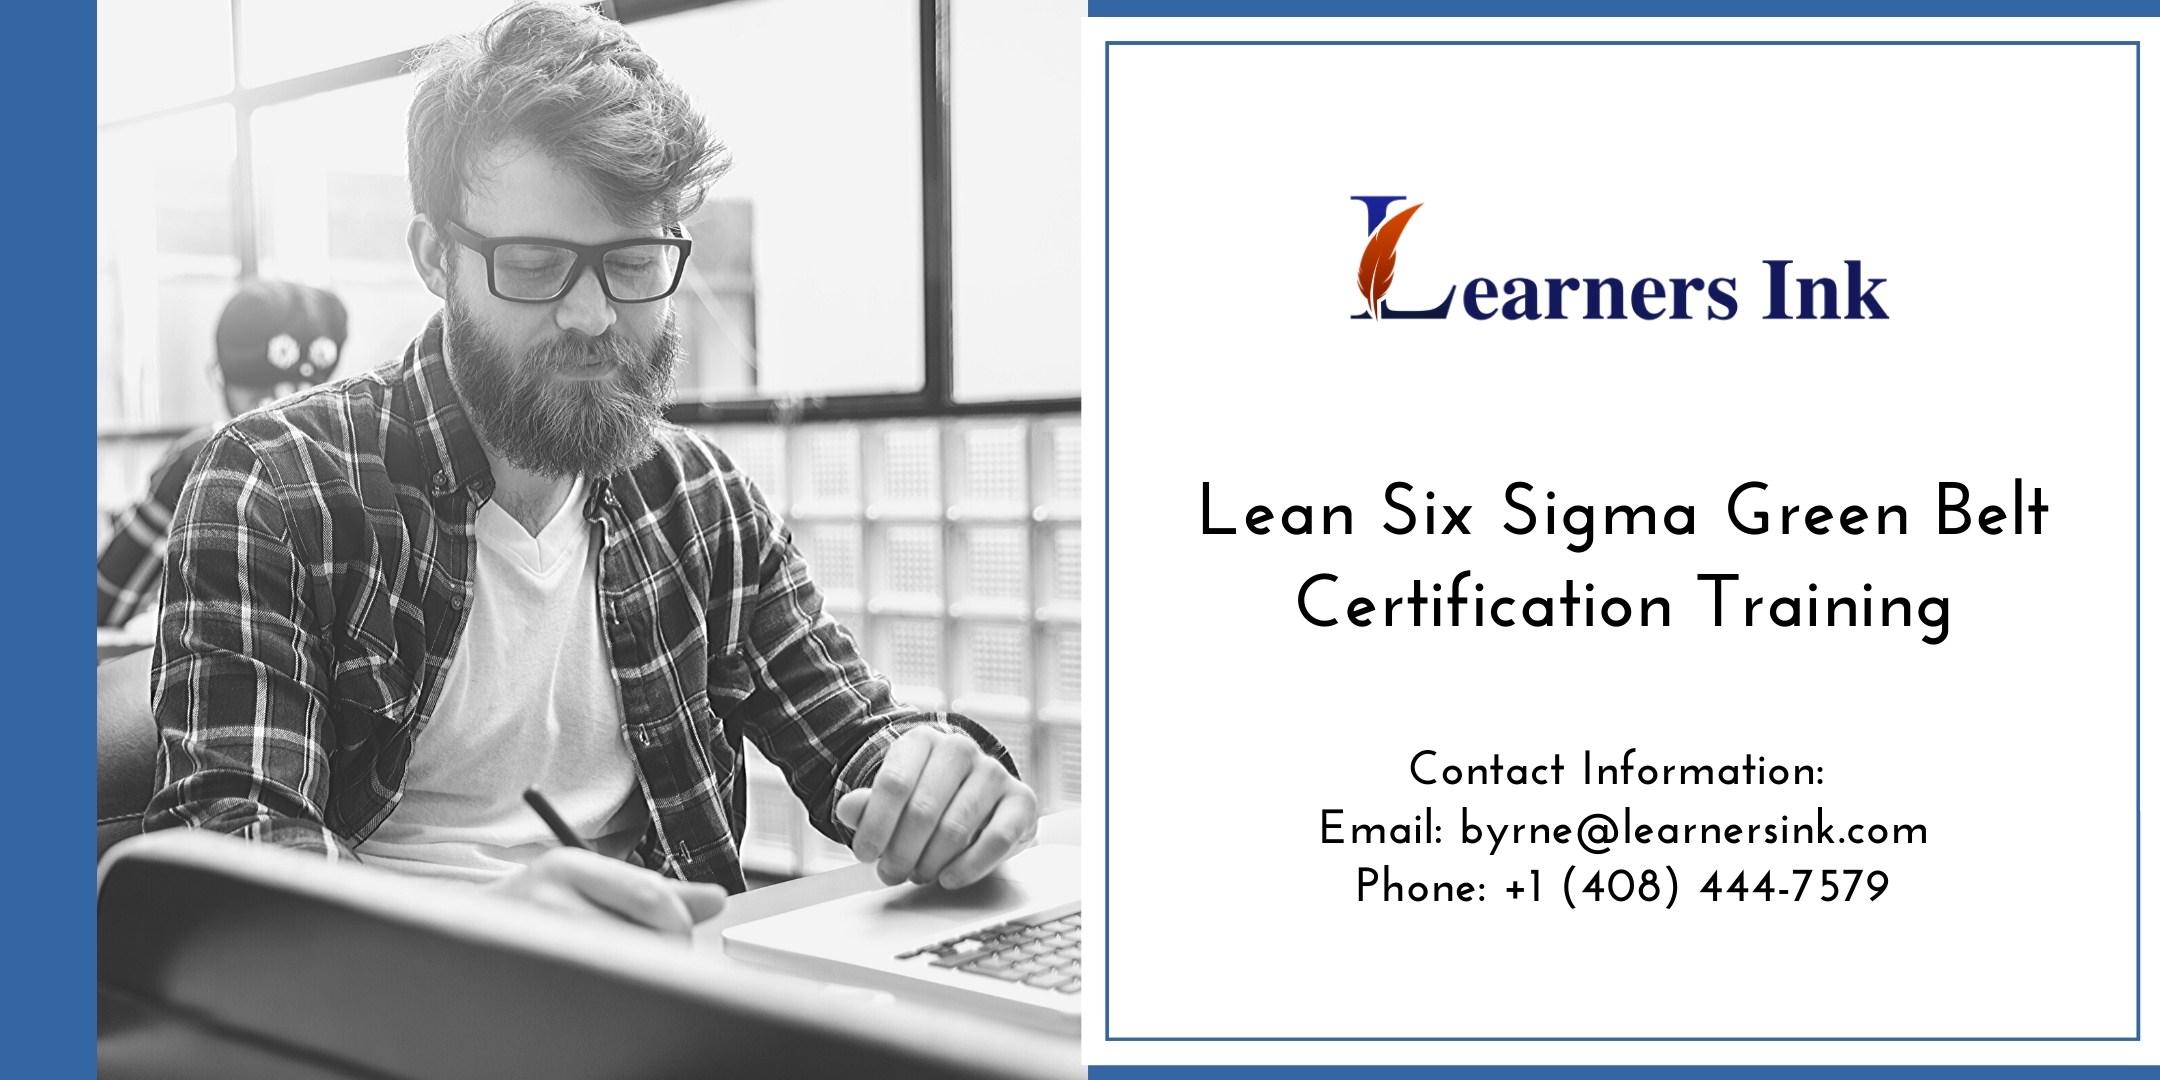 Lean Six Sigma Green Belt Certification Training Course (LSSGB) in Cairns